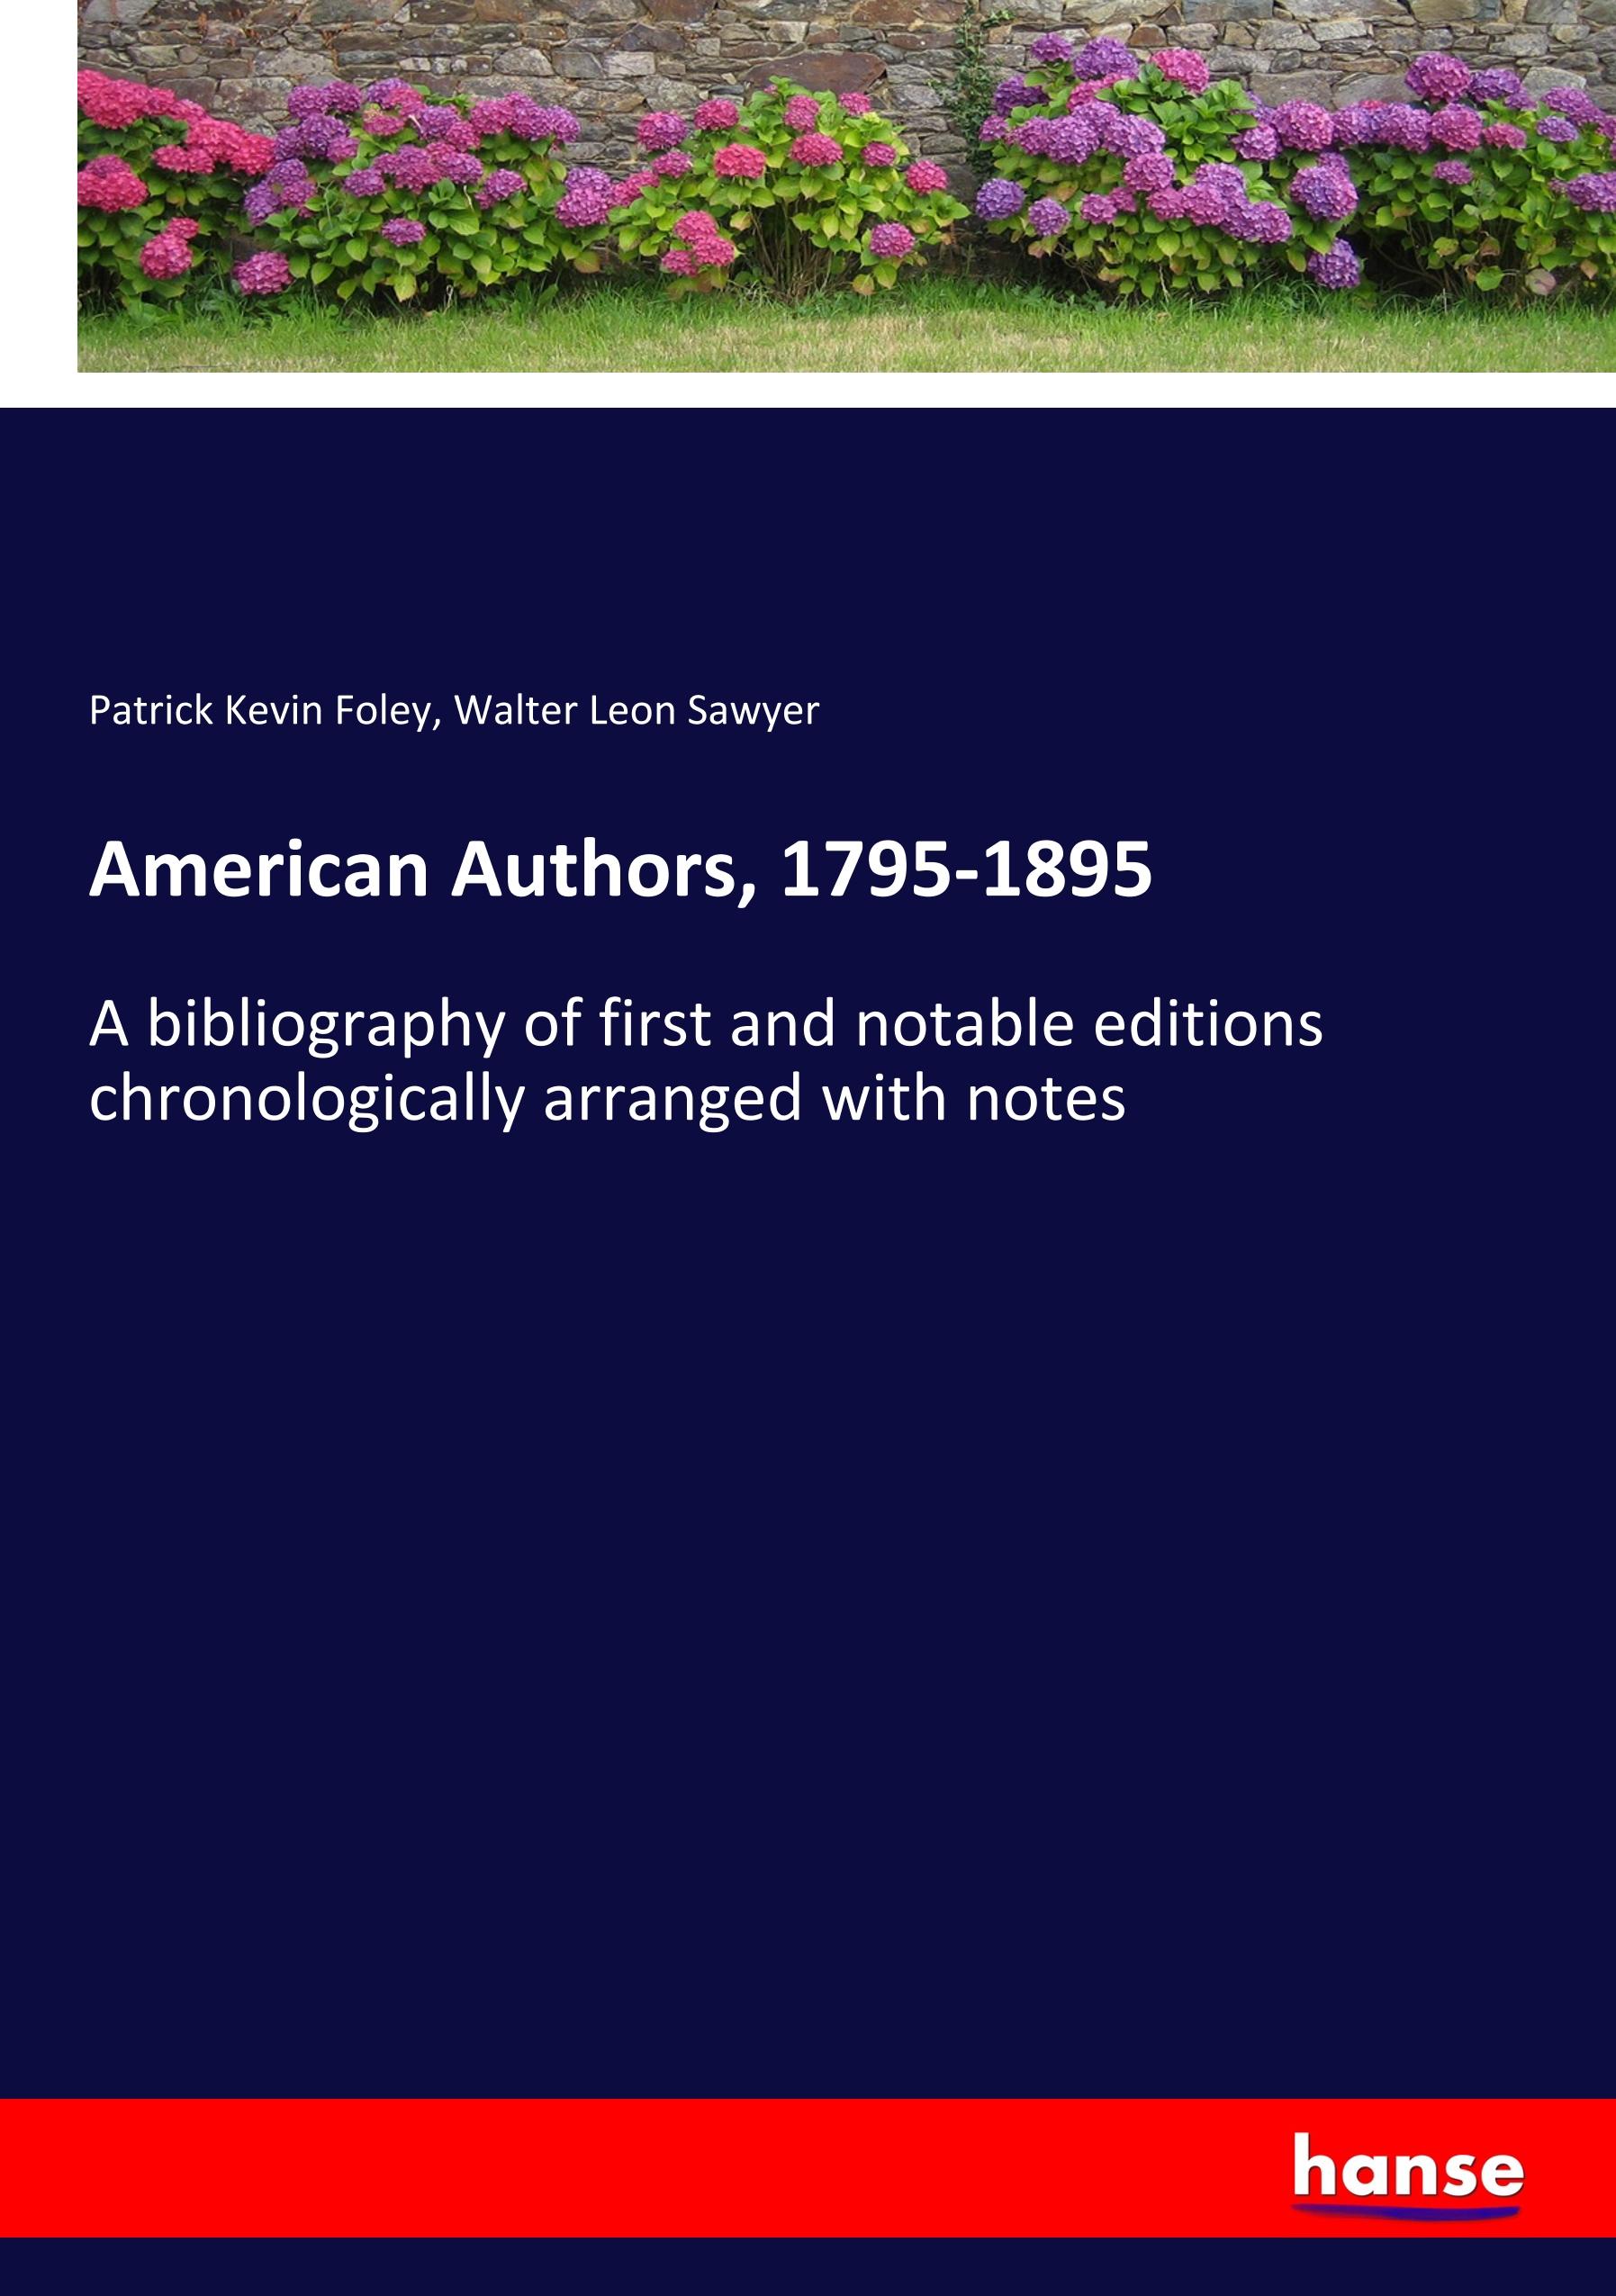 American Authors, 1795-1895  A bibliography of first and notable editions chronologically arranged with notes  Patrick Kevin Foley (u. a.)  Taschenbuch  Paperback  Englisch  2019 - Foley, Patrick Kevin